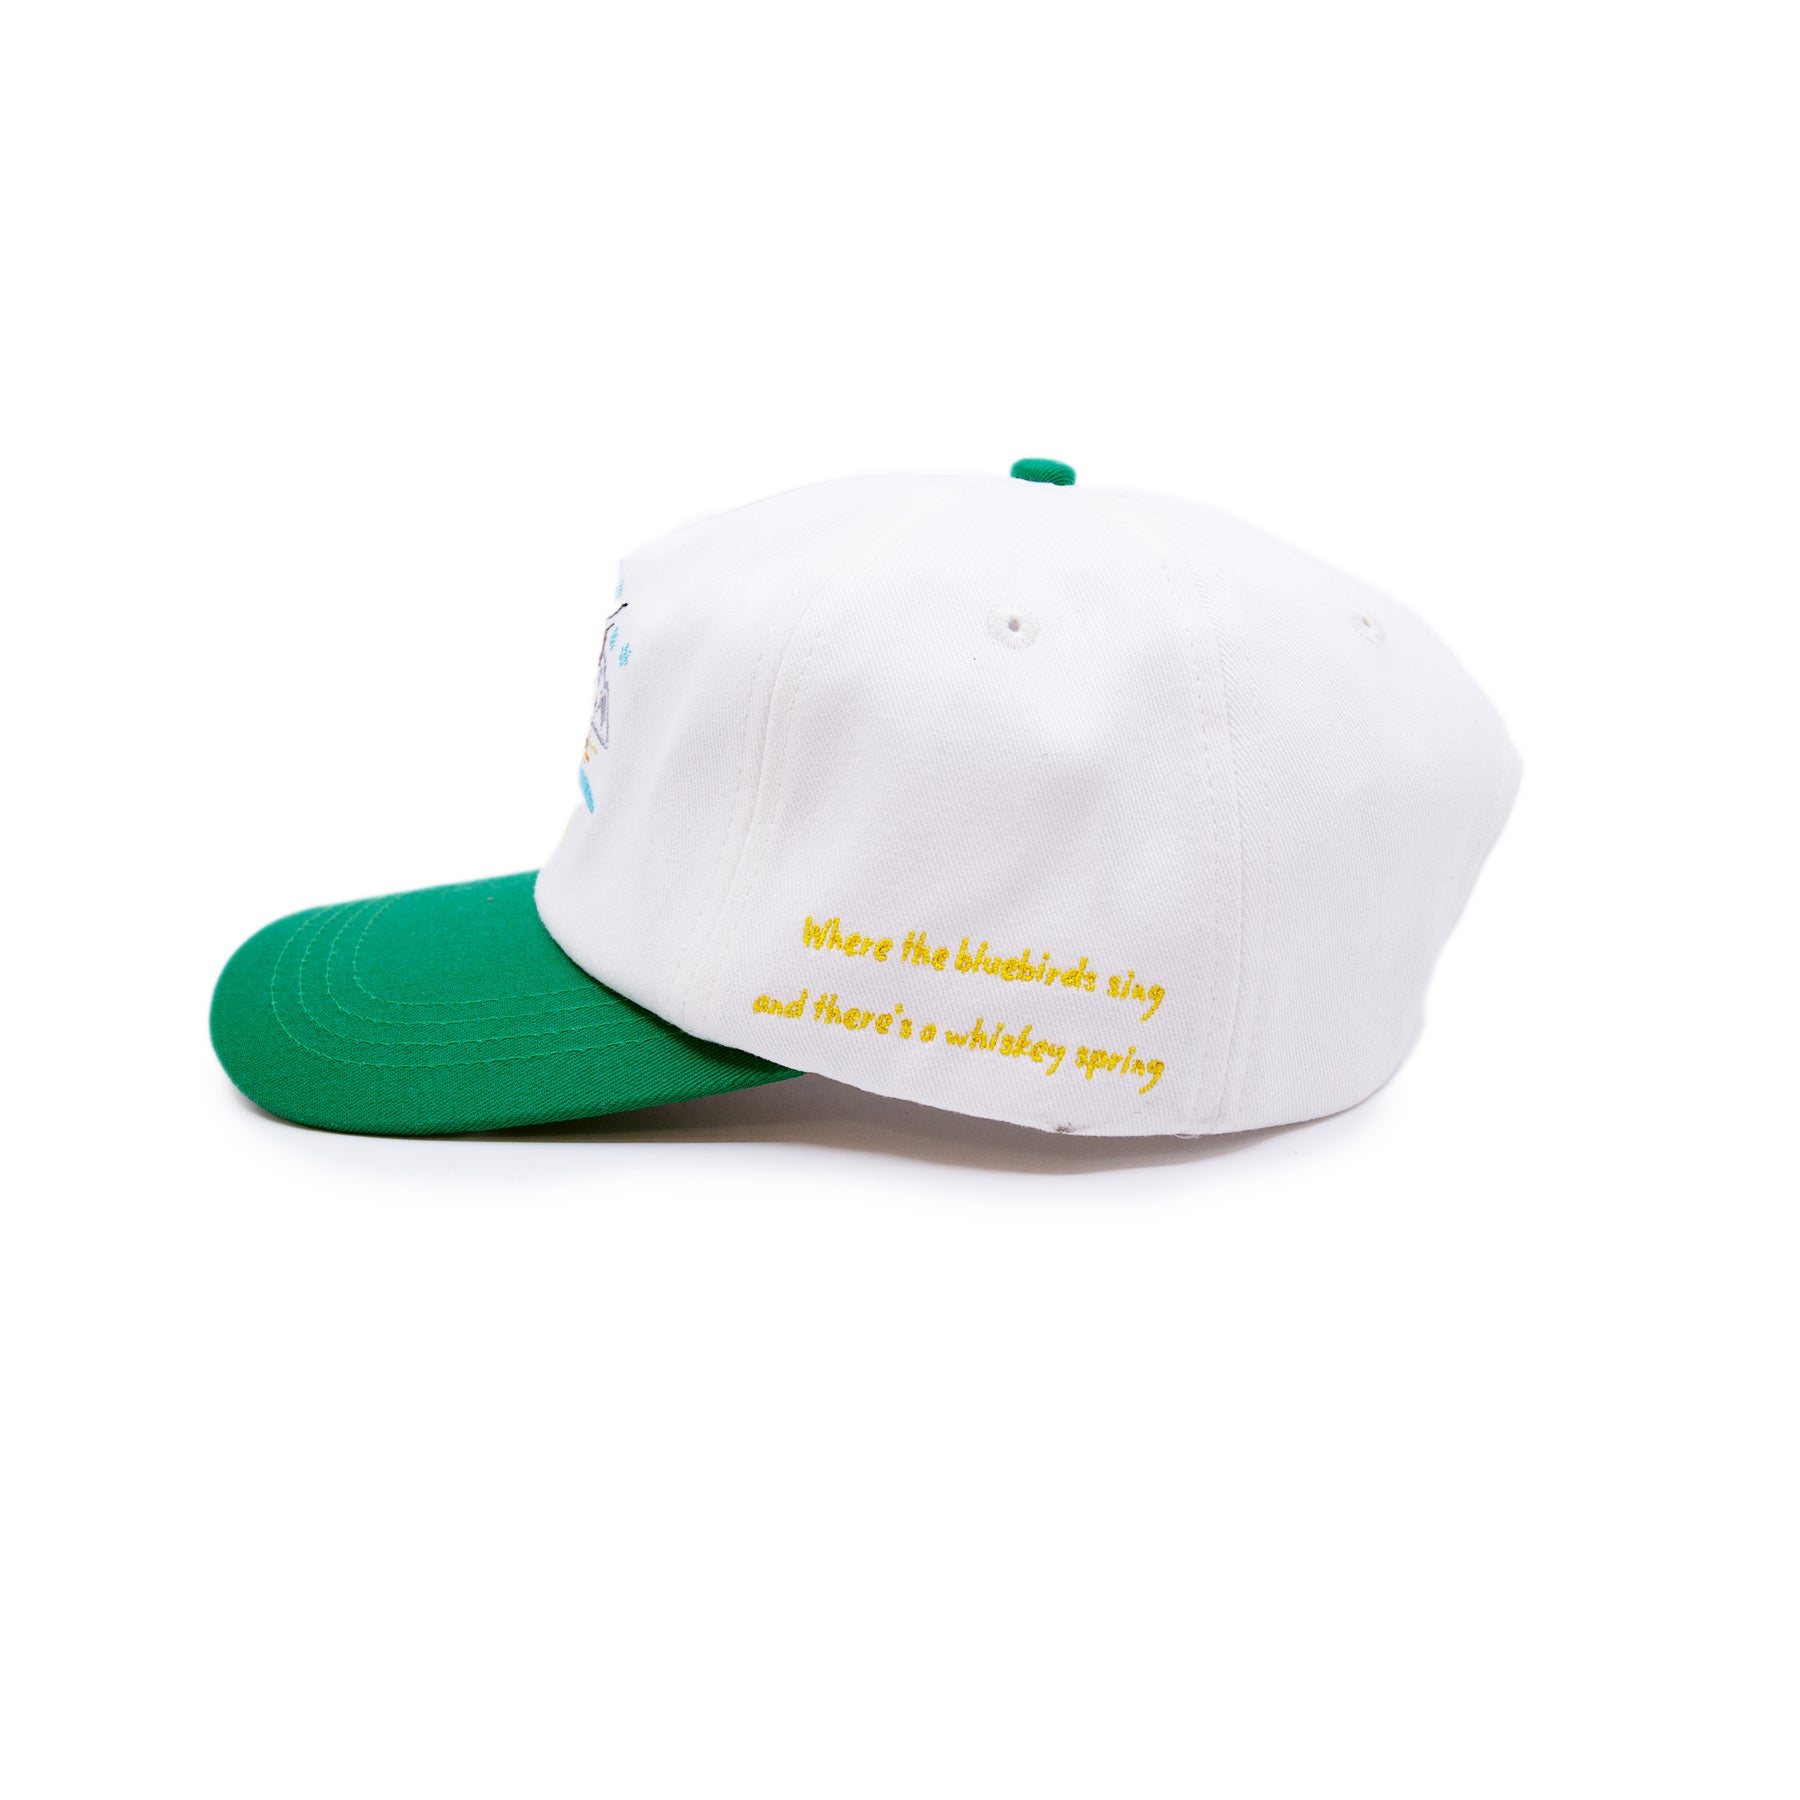 Aspen Tourist Cap  100% cotton in Cream/Green  Multicolor Embroidered 'Aspen' graphic  Yellow embroidered “Where the bluebirds sing and there’s a whiskey spring” message on side  Embroidered matchstick on reverse side  One size fits all  Made in Los Angeles 